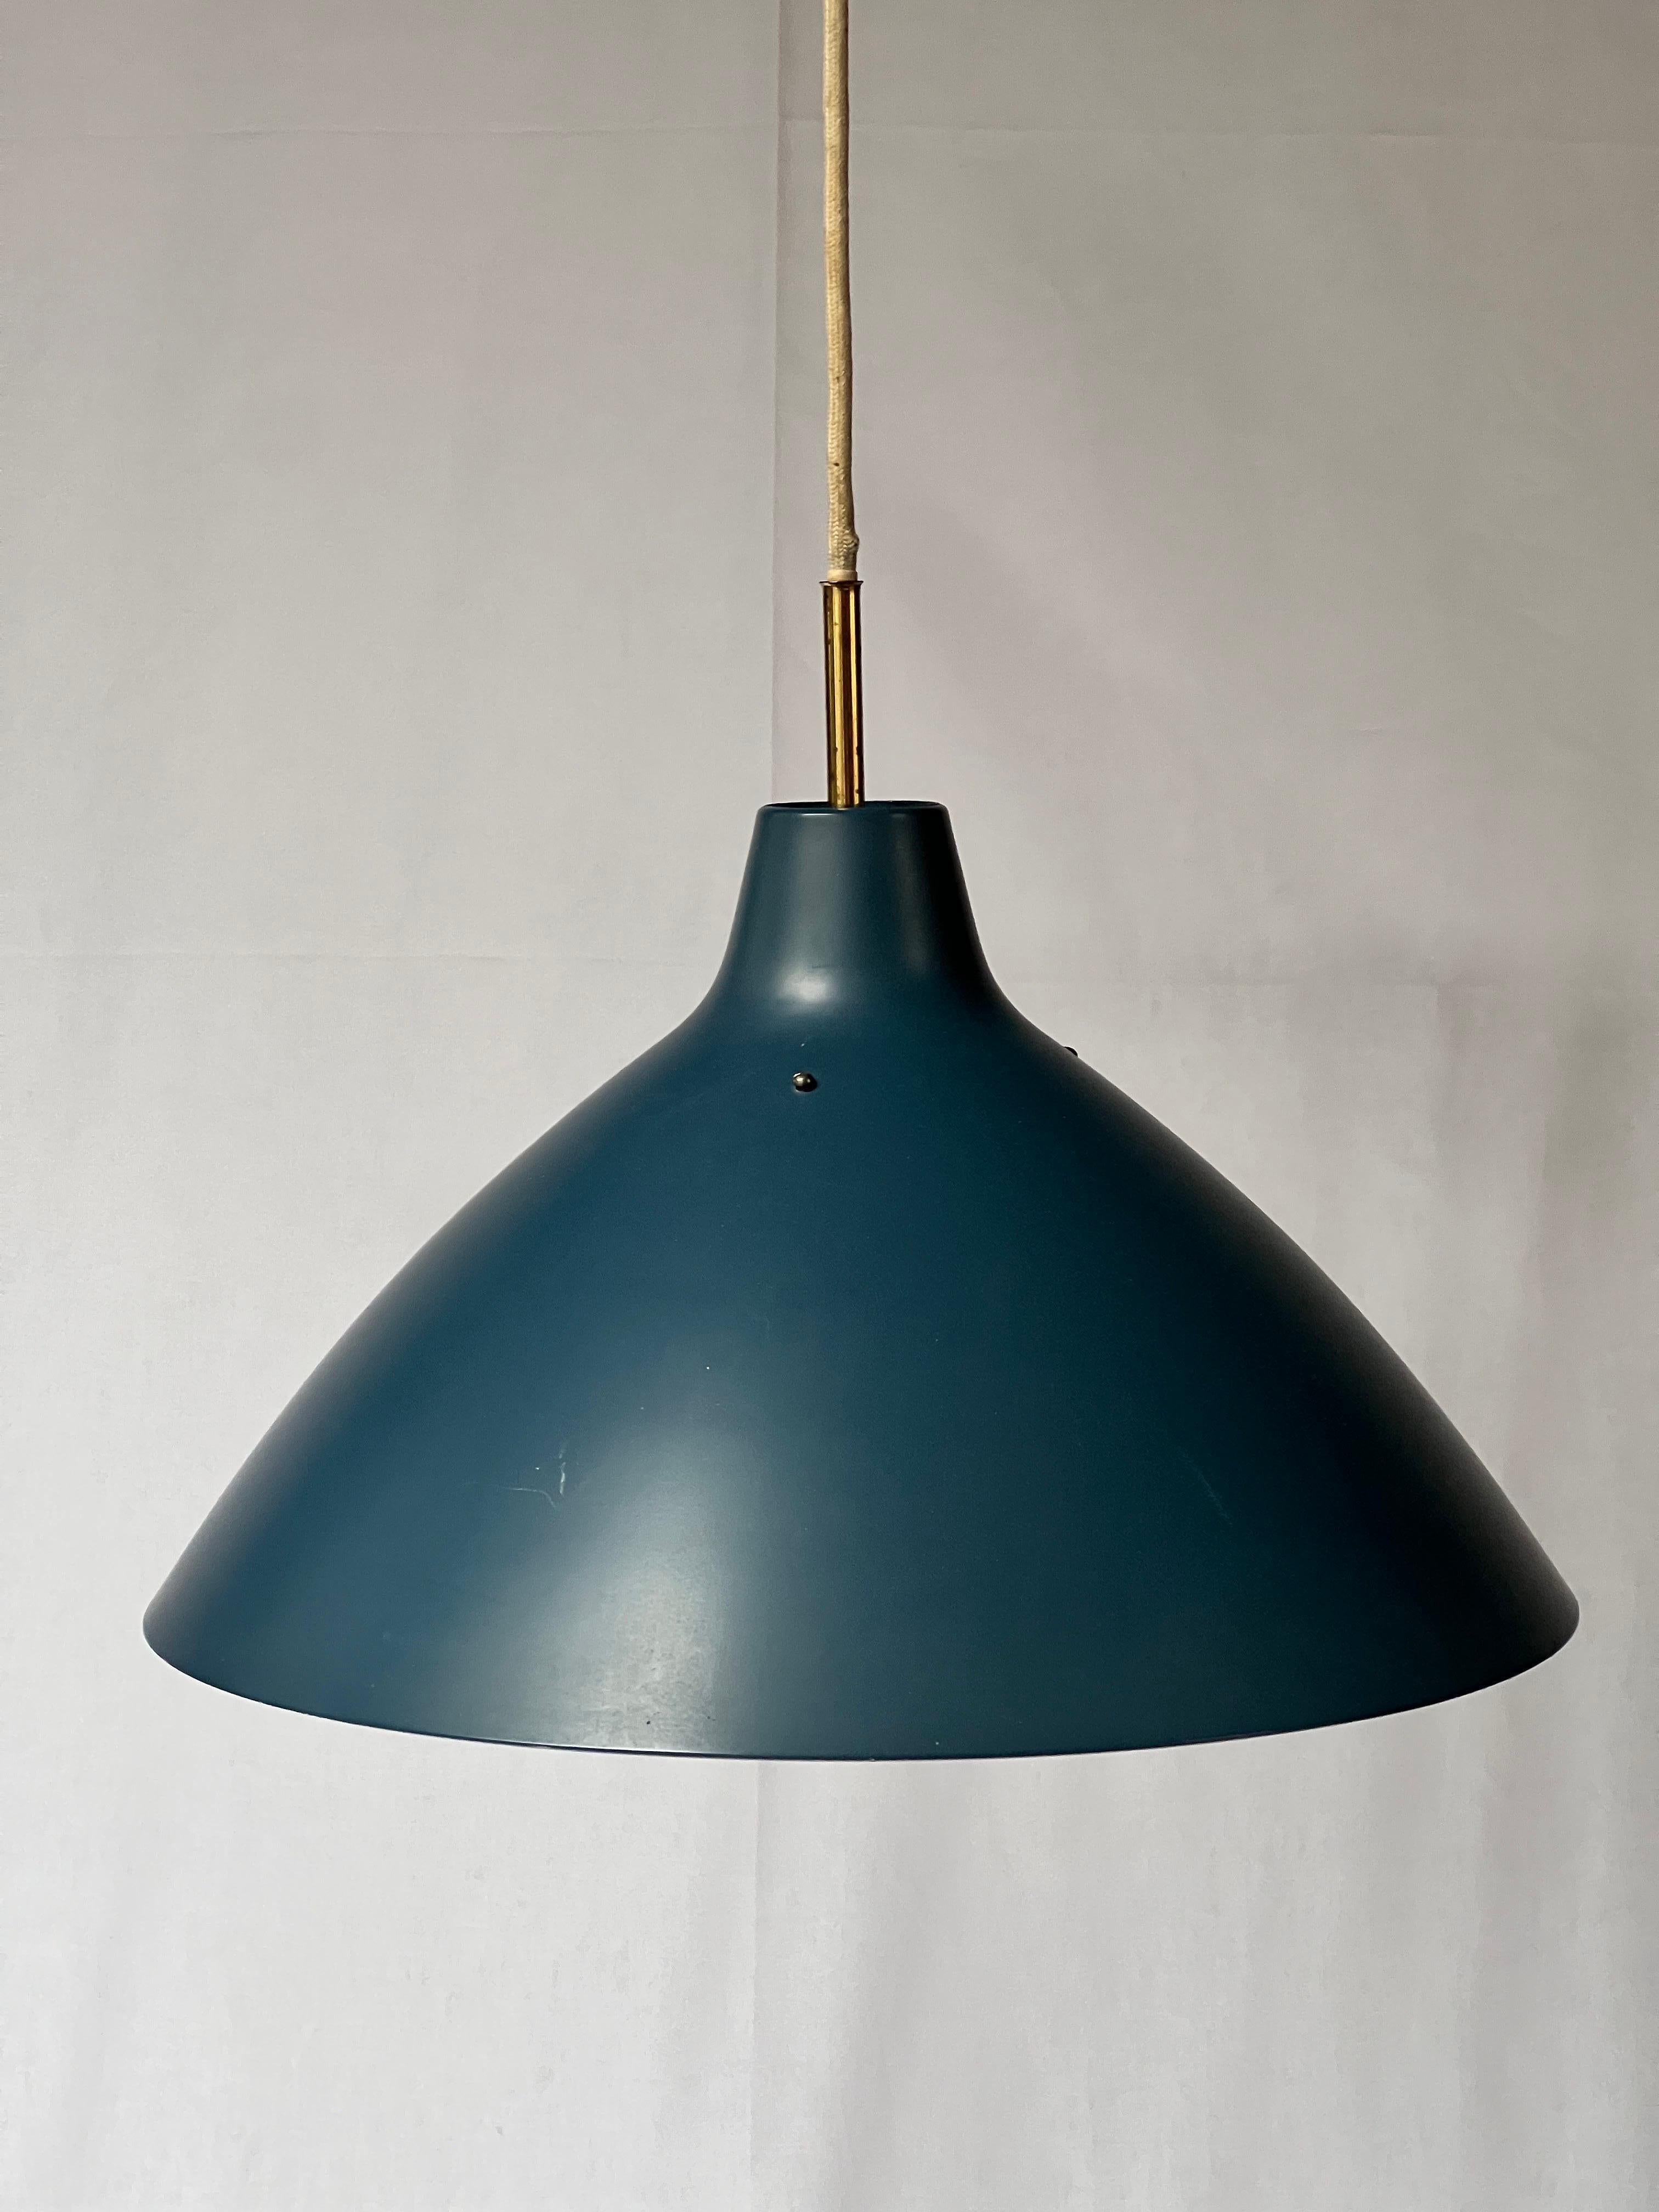 Hand-Crafted Bertil Brisborg ASEA blue lacquered suspension Lamp, Midcentury Sweden 1950's